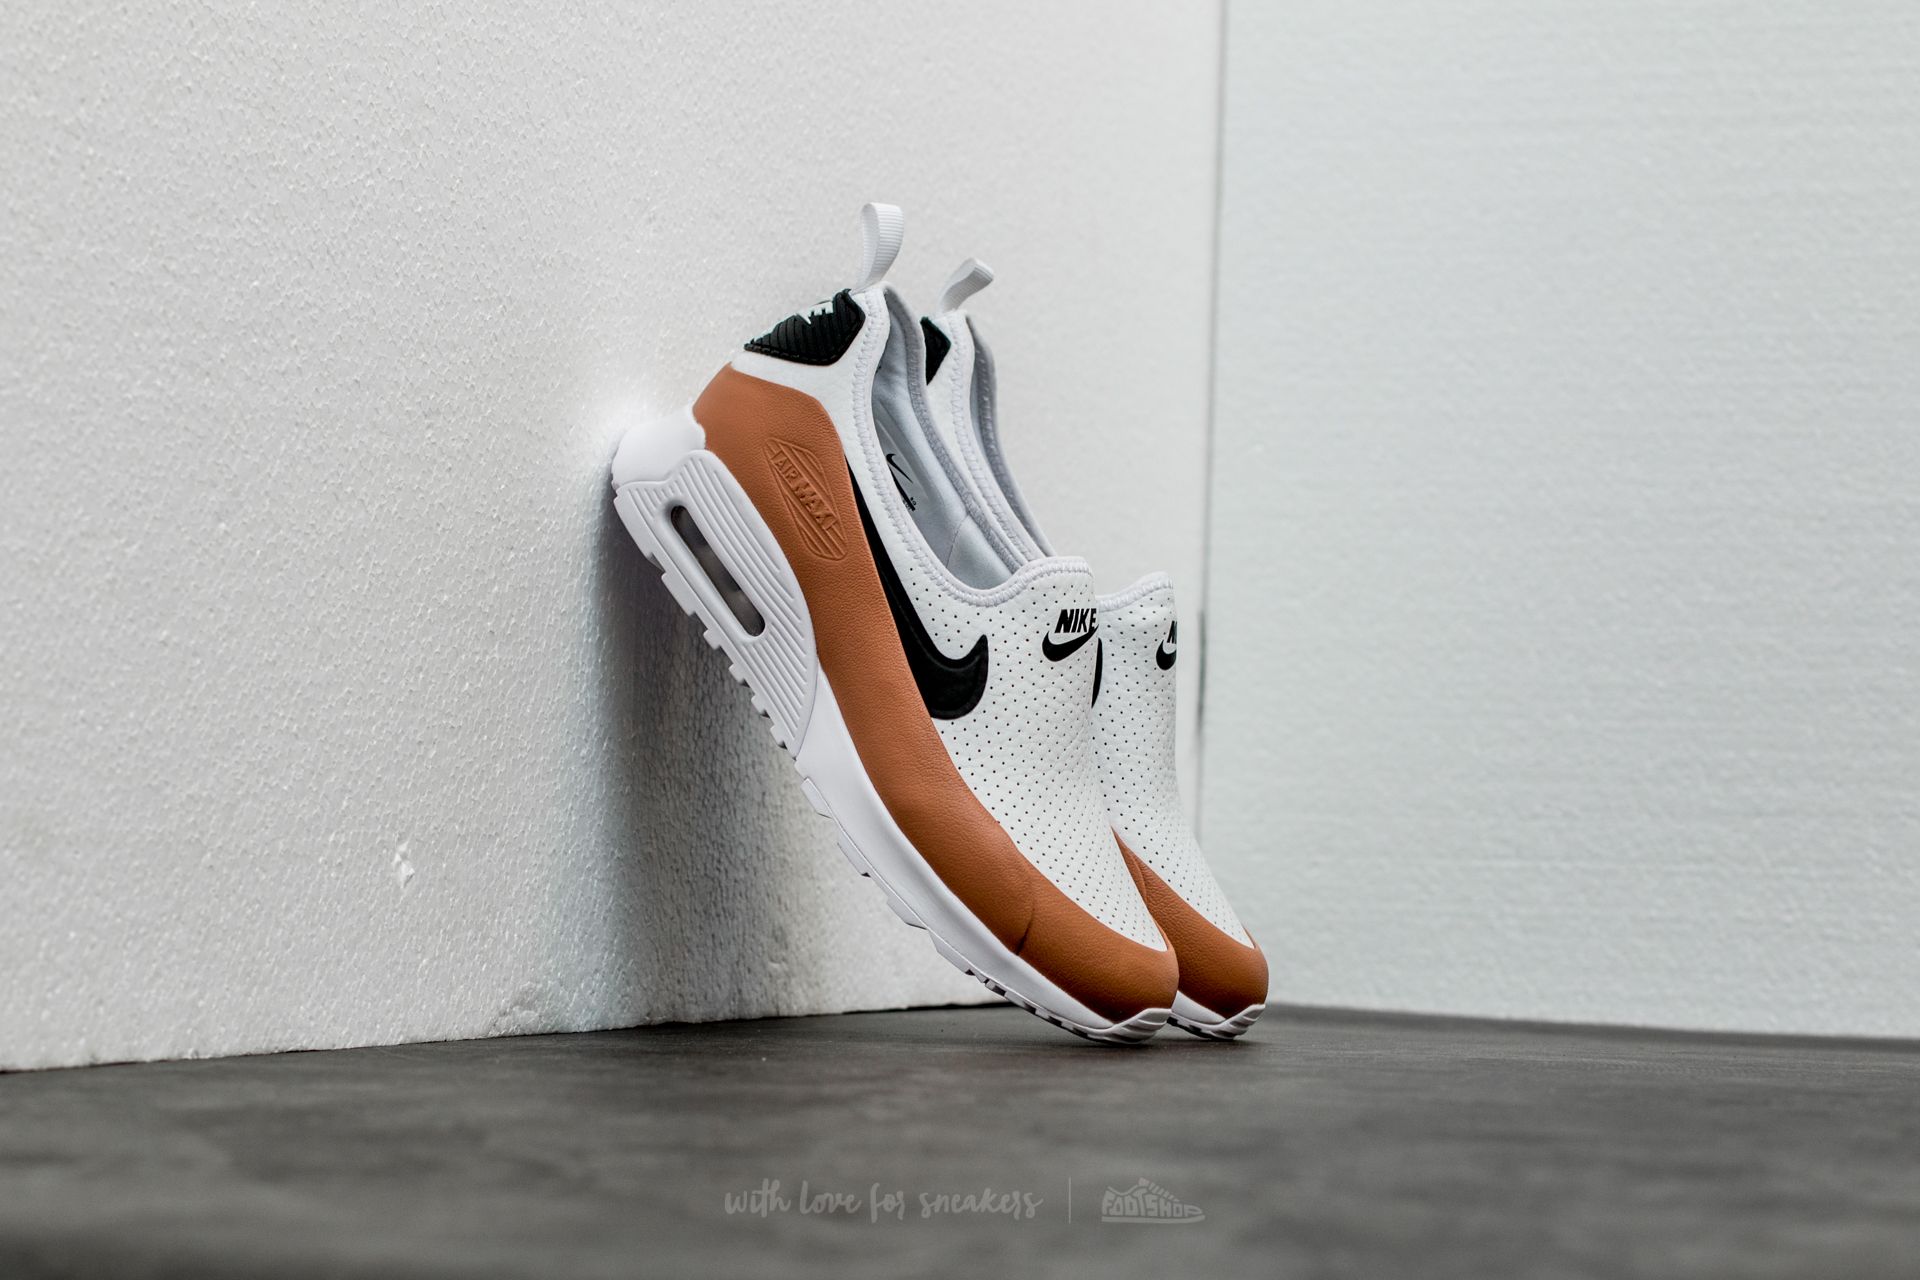 Dámské tenisky a boty Nike W Air Max 90 Ultra 2.0 Ease White/ Black-Dusted Clay